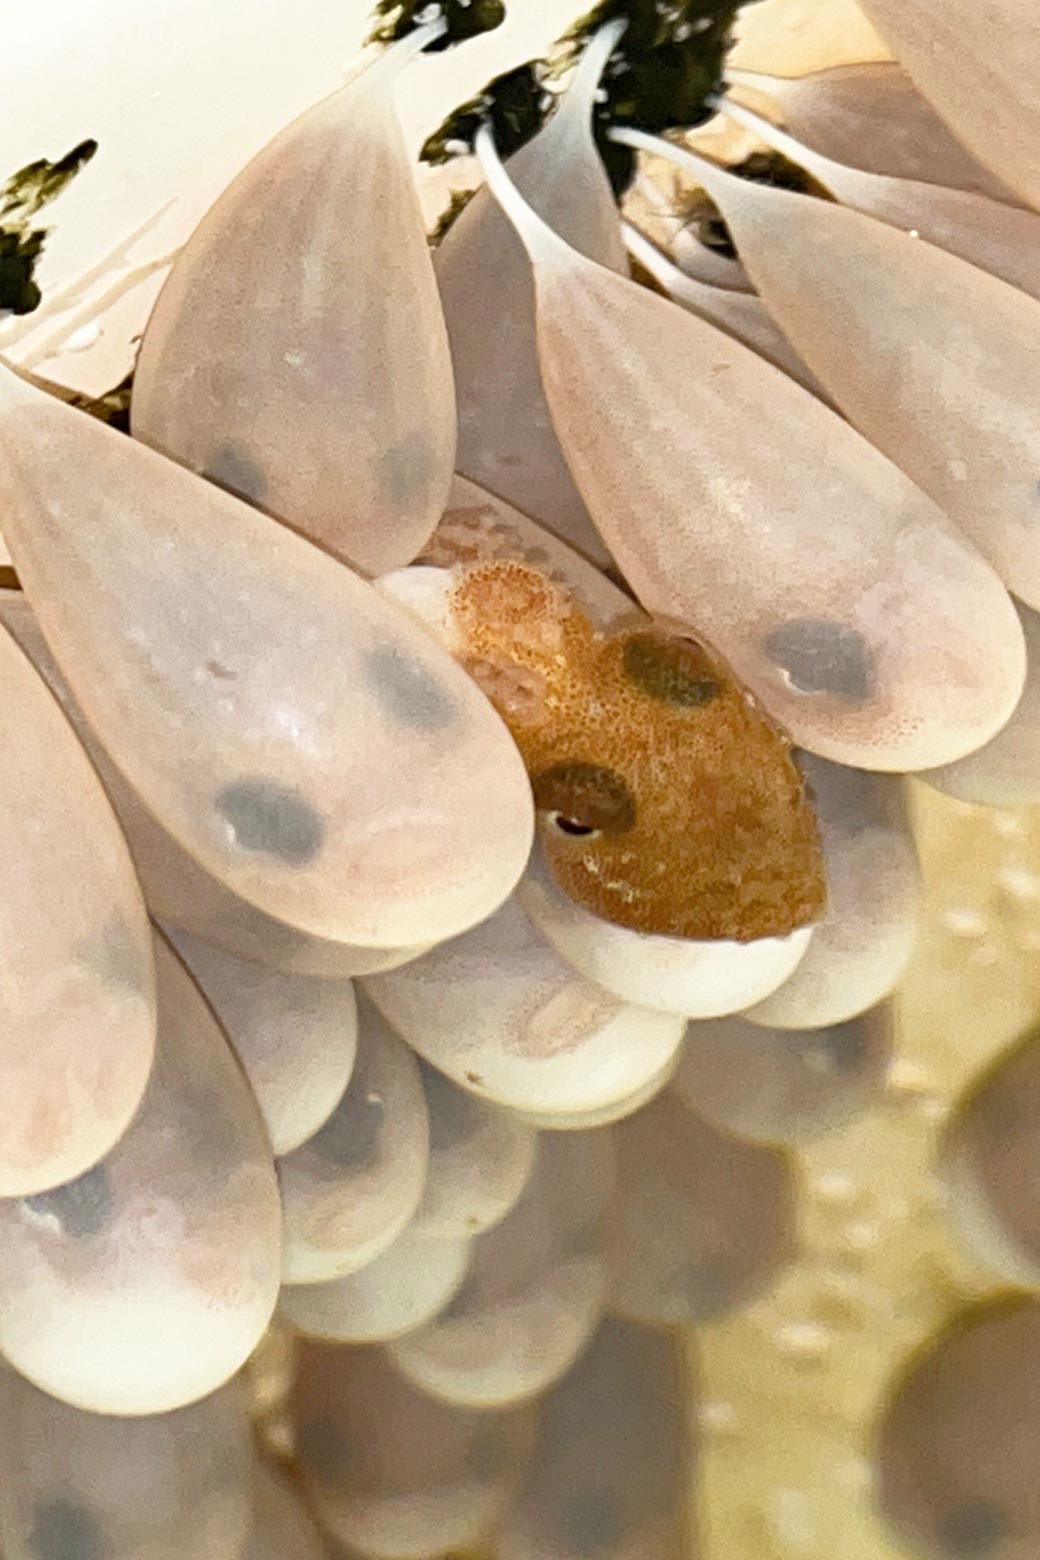 Fertilized eggs of the rescued octopus